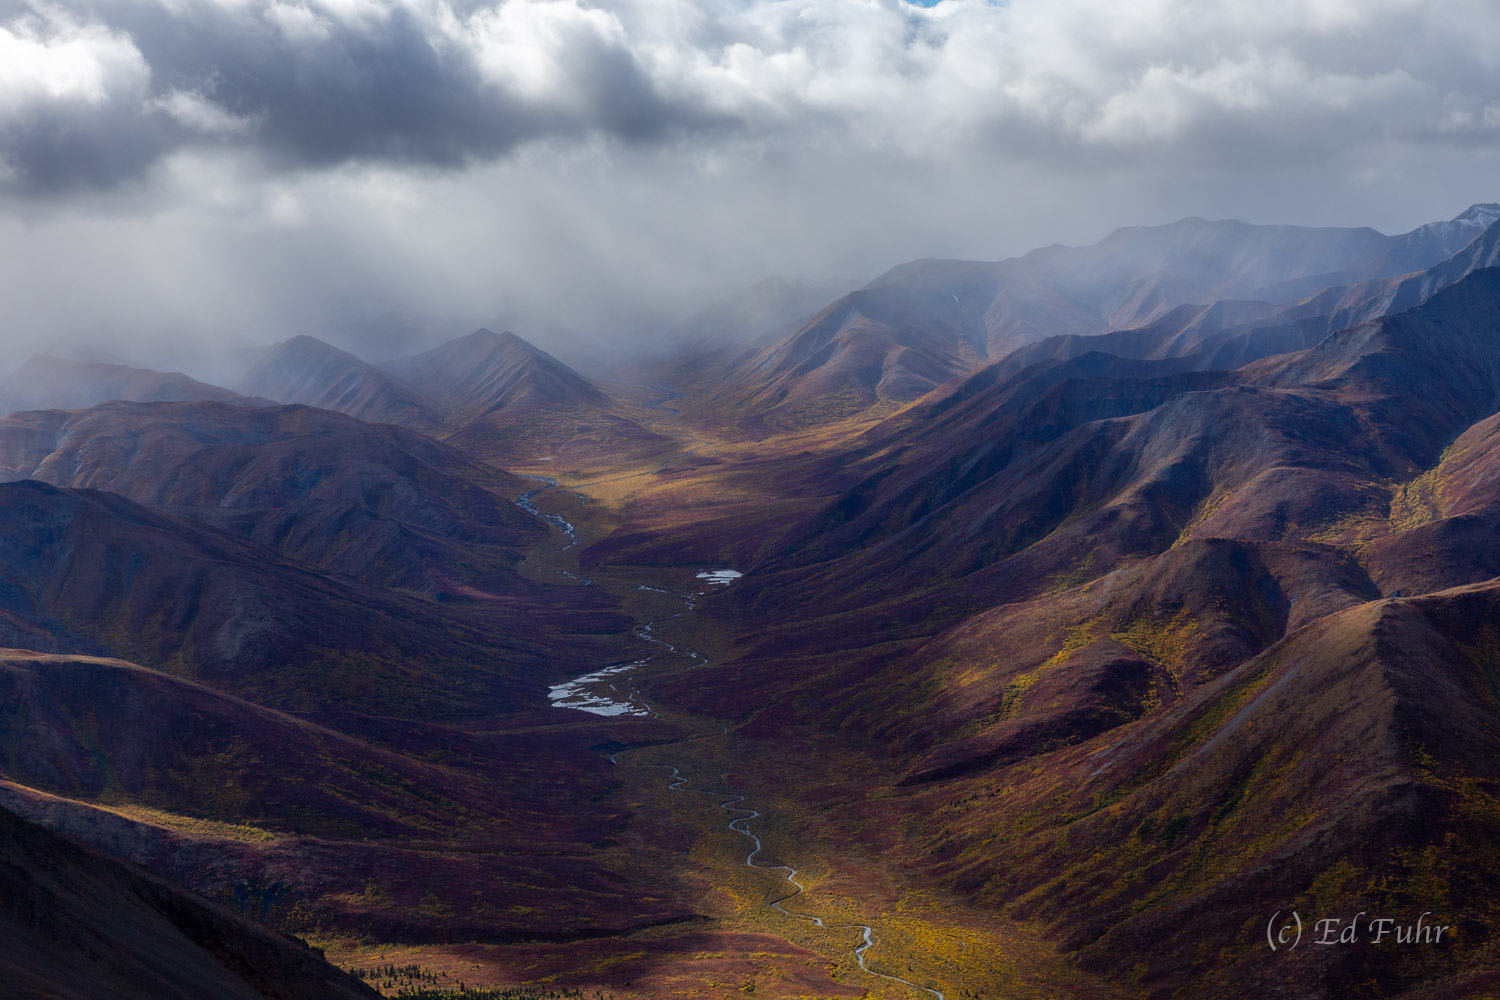 One of Denali's many rivers courses between the mountains that rise to the east and west of this valley.